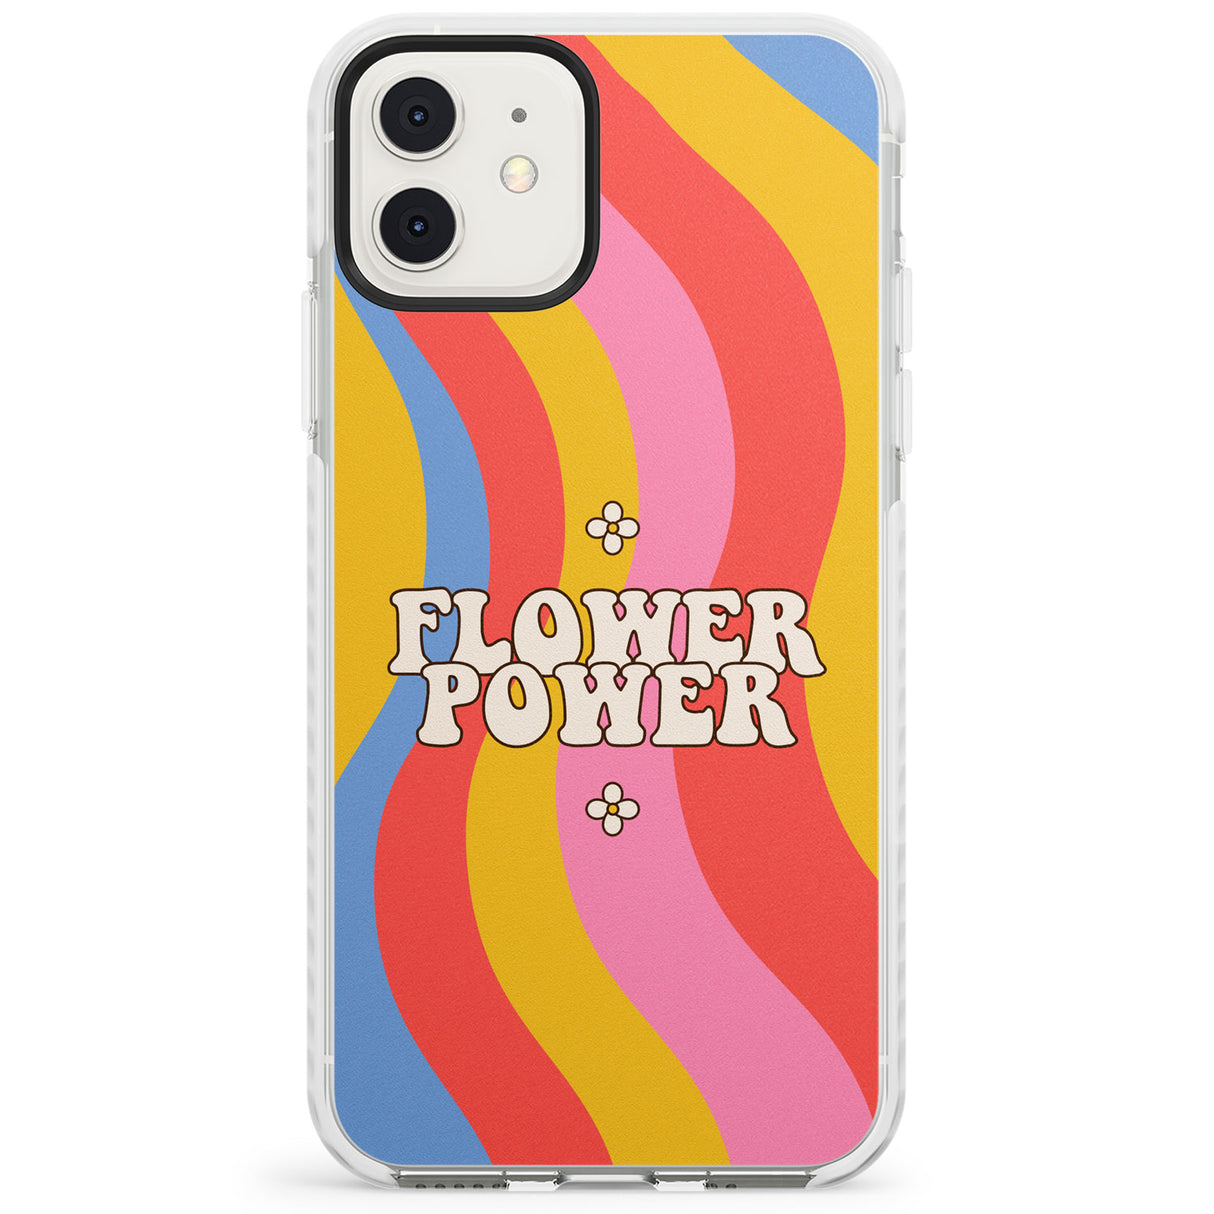 Melting Flower Power Impact Phone Case for iPhone 11, iphone 12